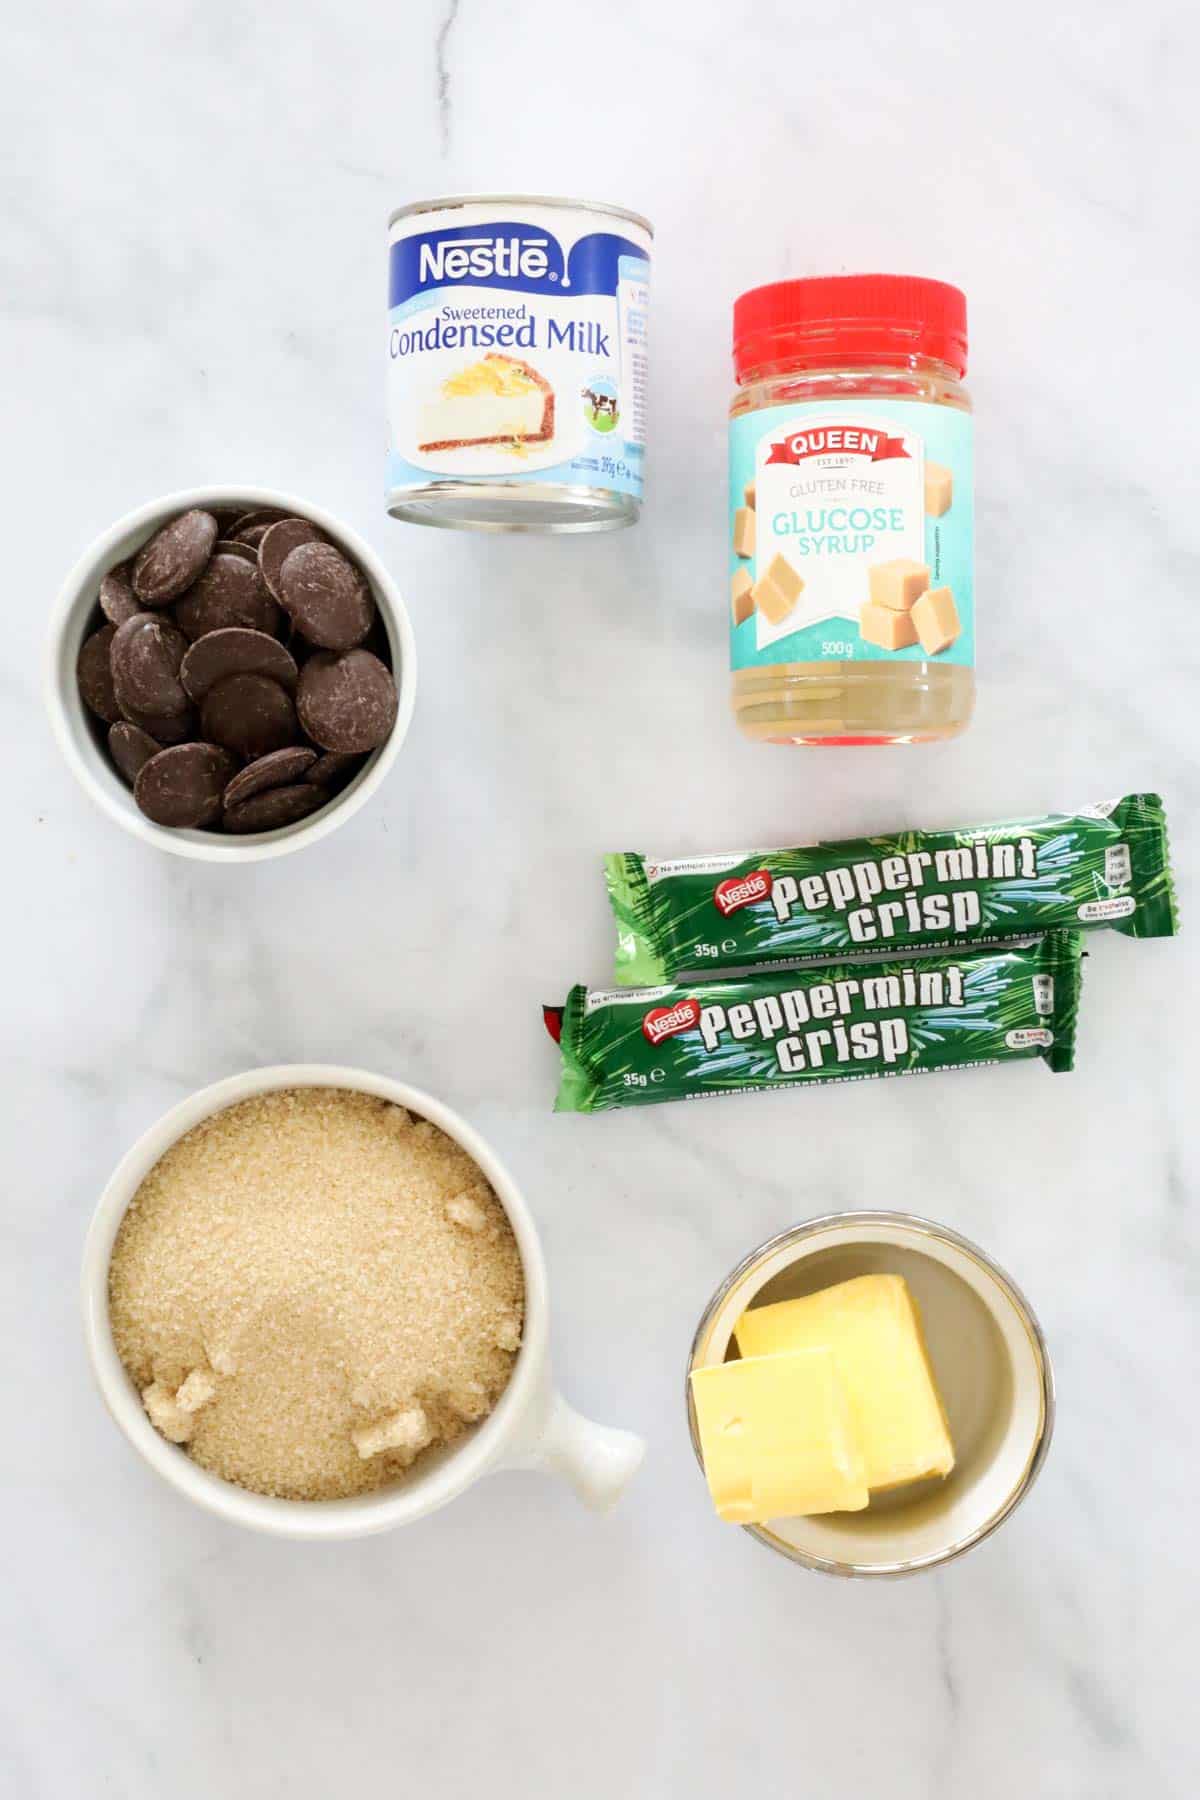 The ingredients for chocolate mint fudge.